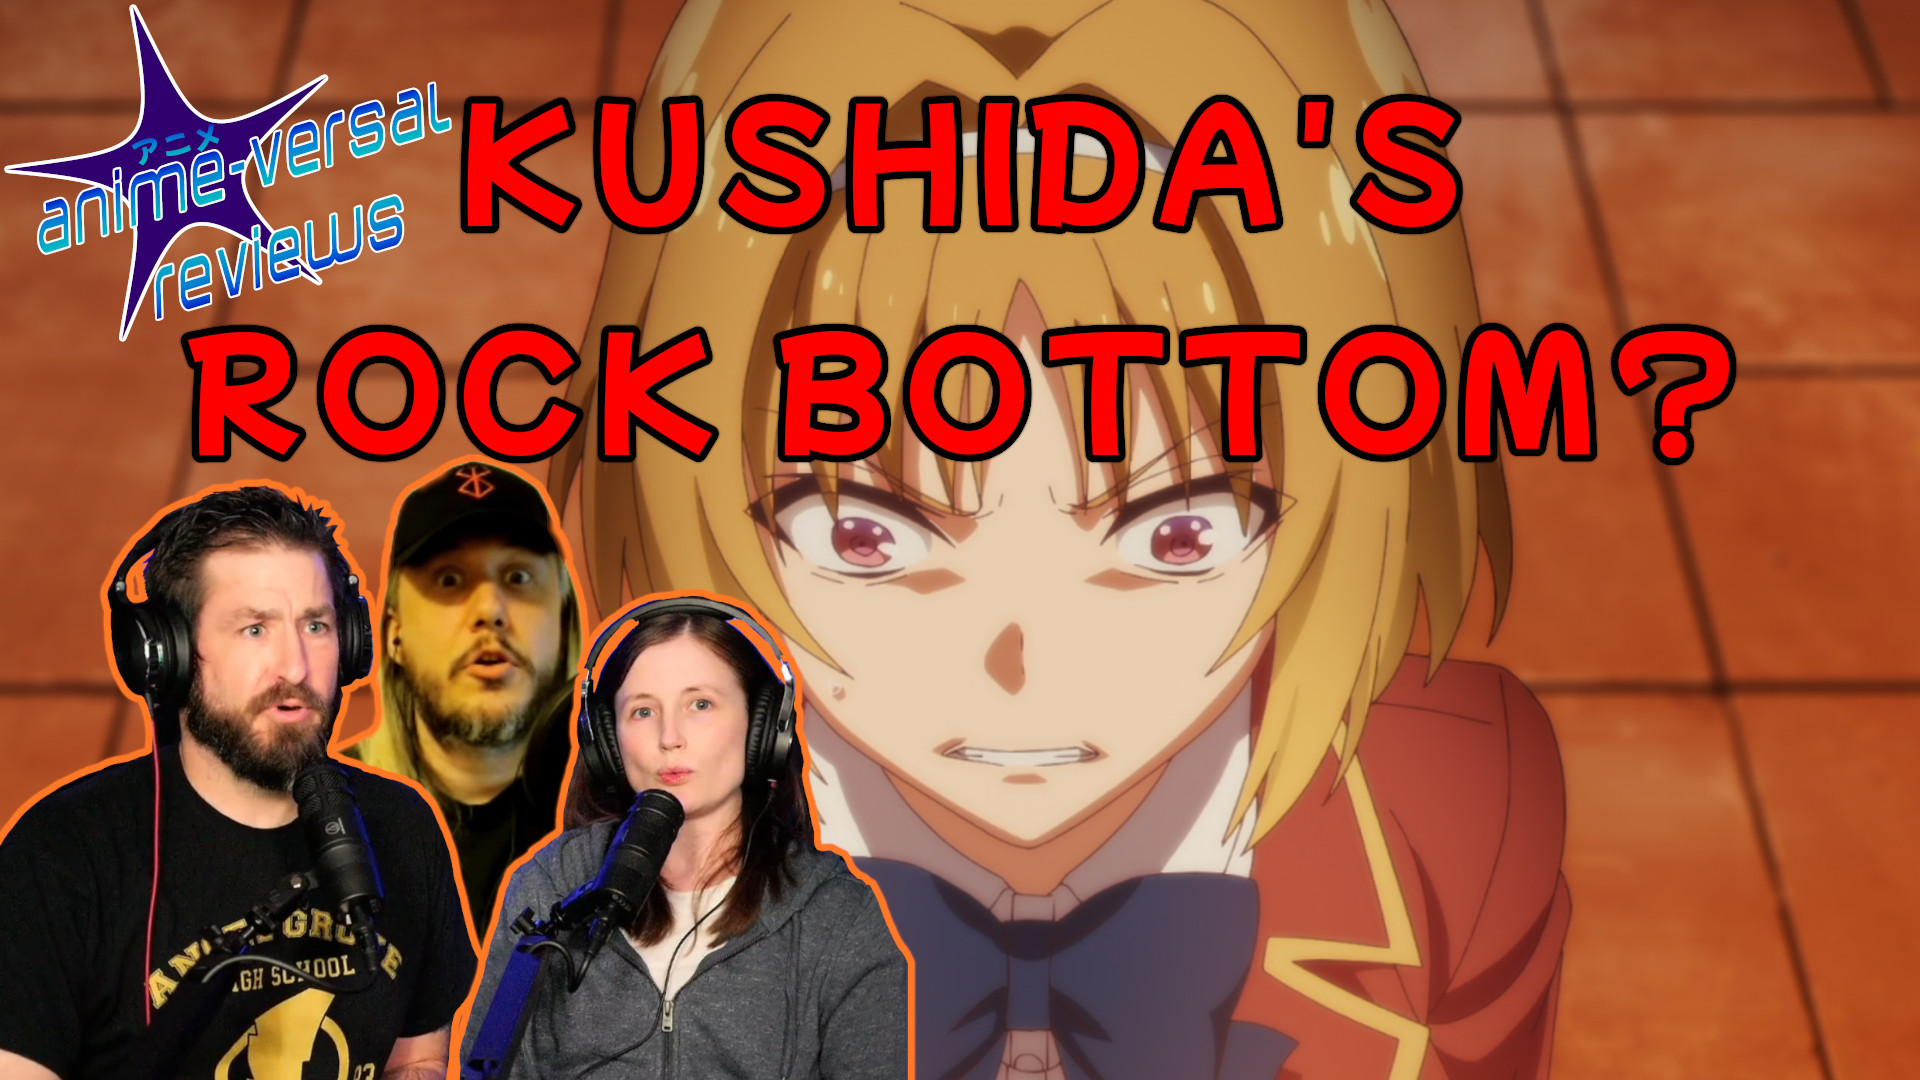 A thumbnail for the AVR Podcast featuring: Image of Kushida from Classroom of the Elite Season 2 Episode 9 looking very mad. The Hosts, Kyle, Christine, and Brian are seen making shocked faces. This is for a review of Classroom of the Elite Season 2 Episode 9